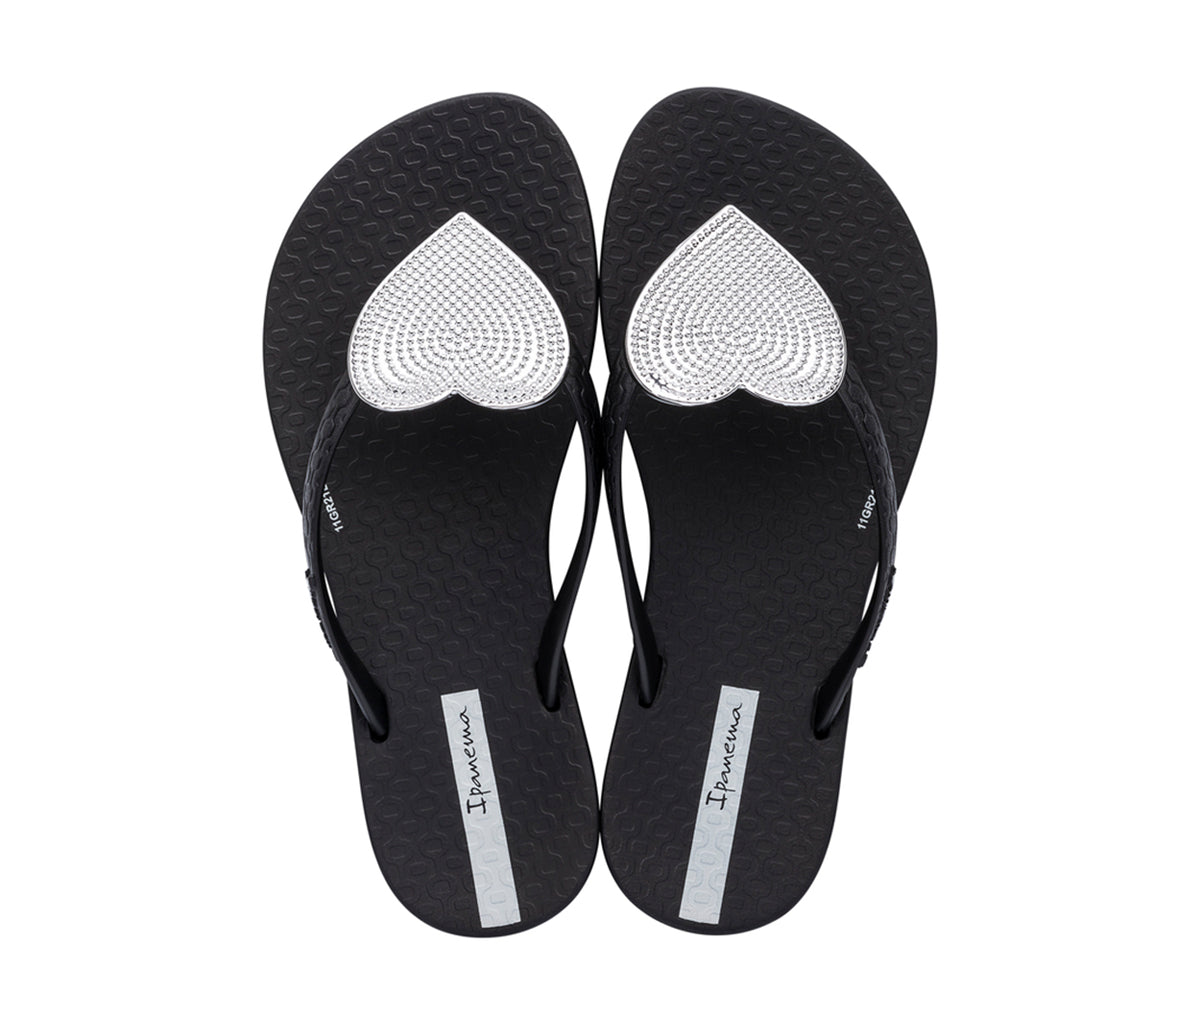 Top view of a pair of black Ipanema Wave Heart kids flip flops with a metallic Silver heart on top.